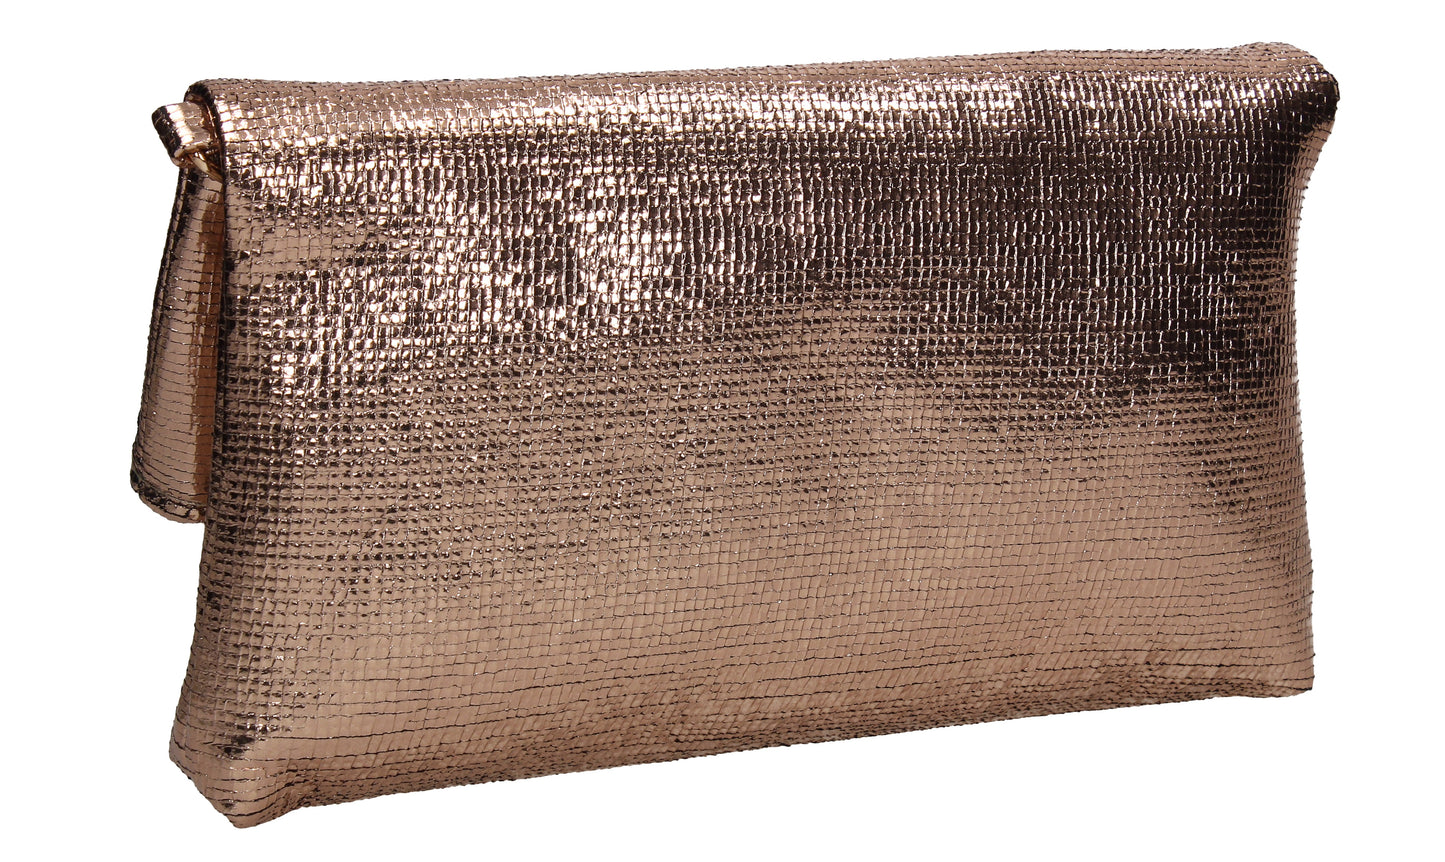 Tess Glamour Party Clutch Bag Champagne